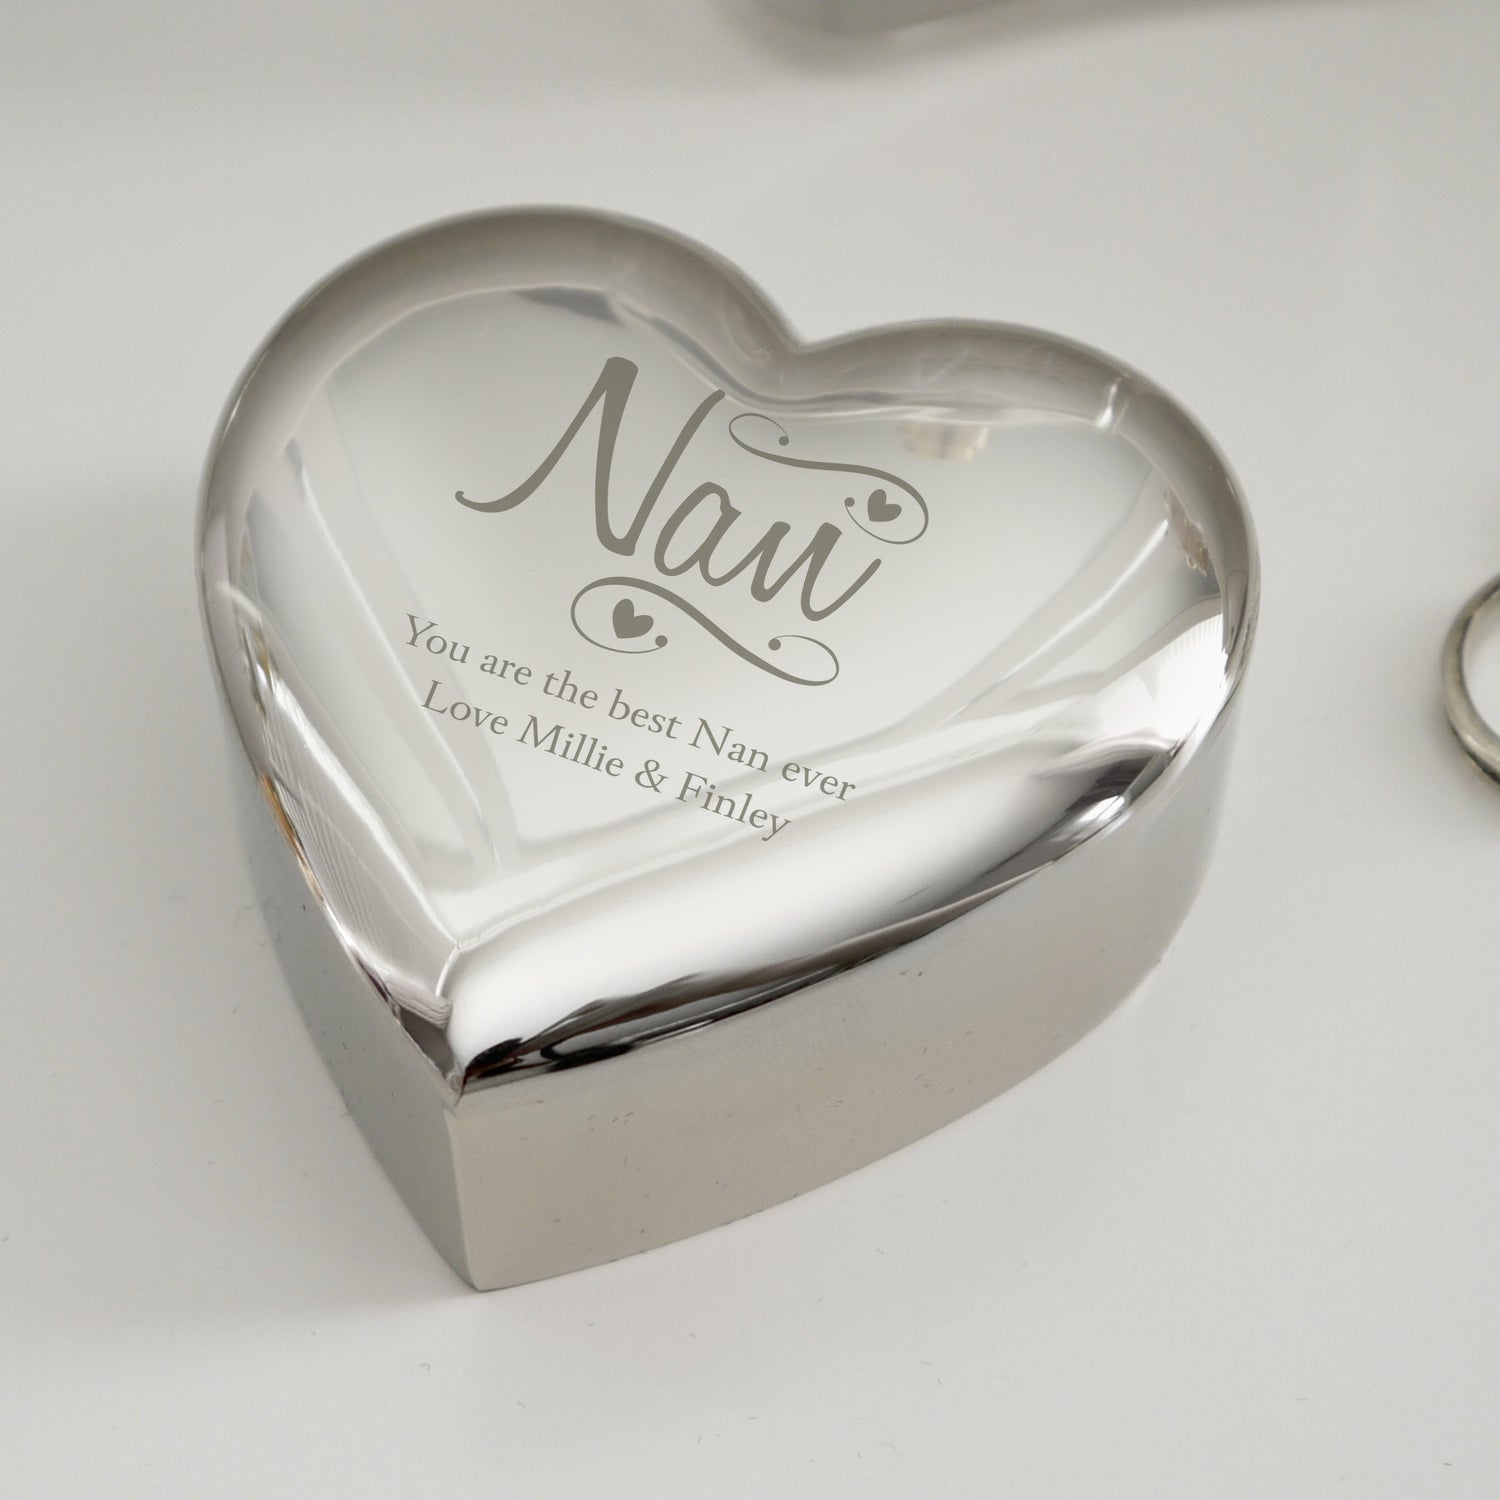 Personalised Engraved Gifts For Grandma | Nan | Free UK Delivery 